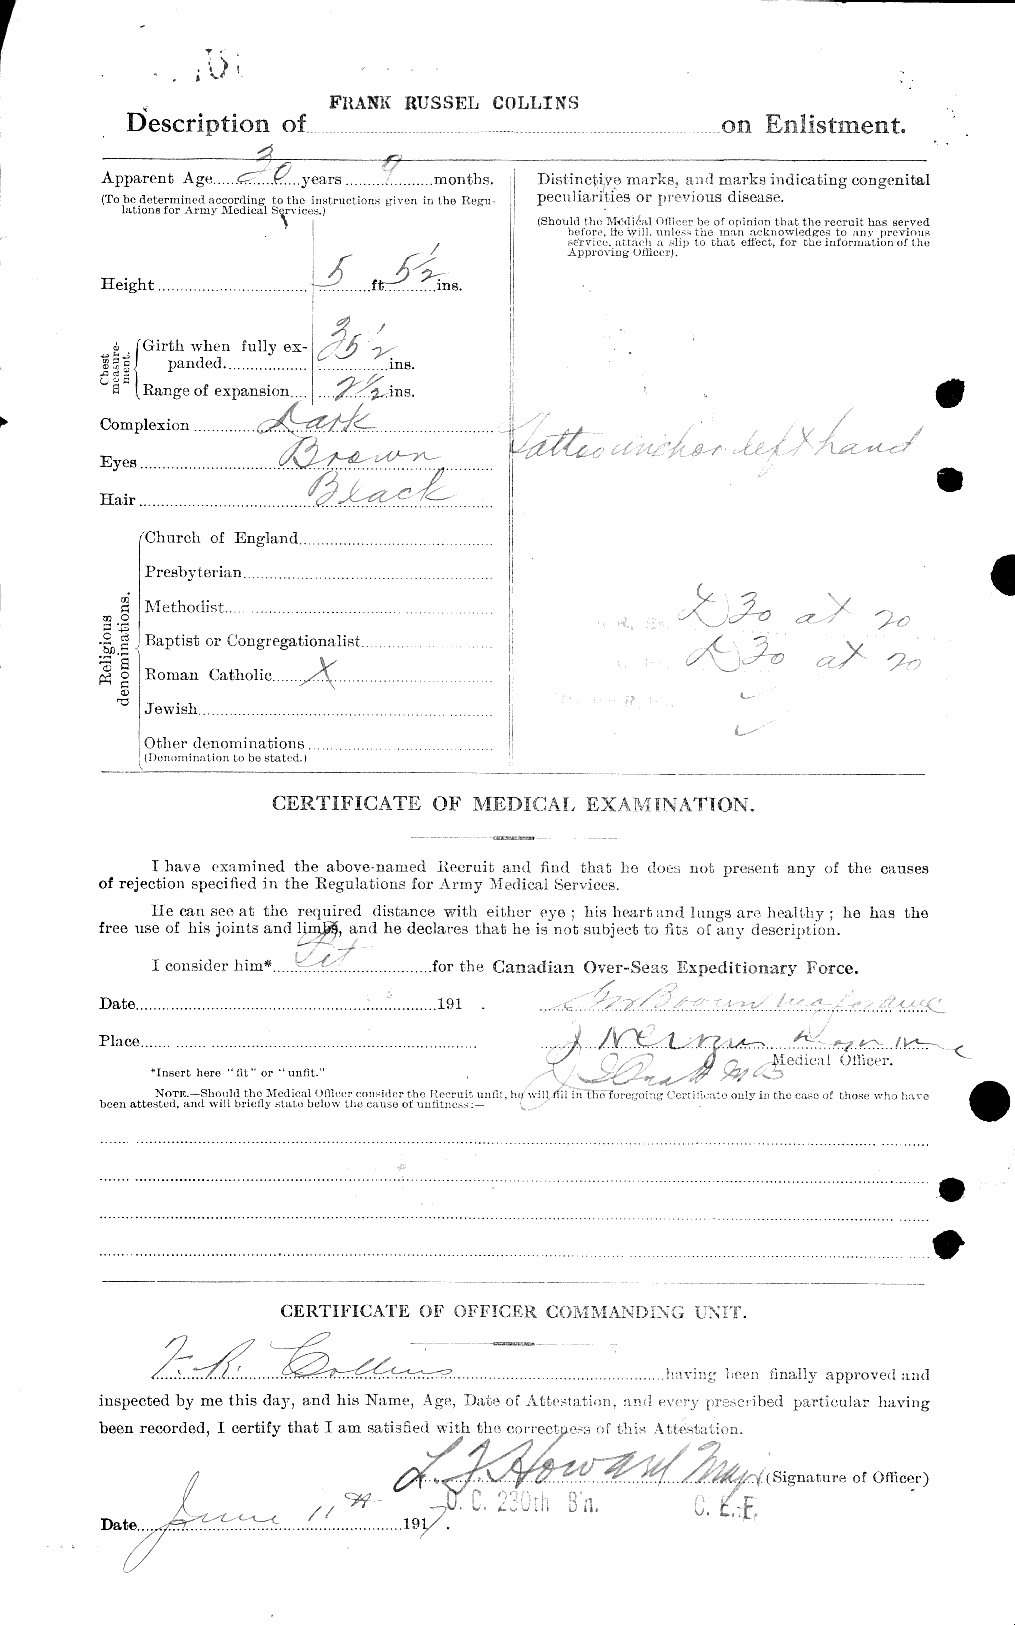 Personnel Records of the First World War - CEF 037820b